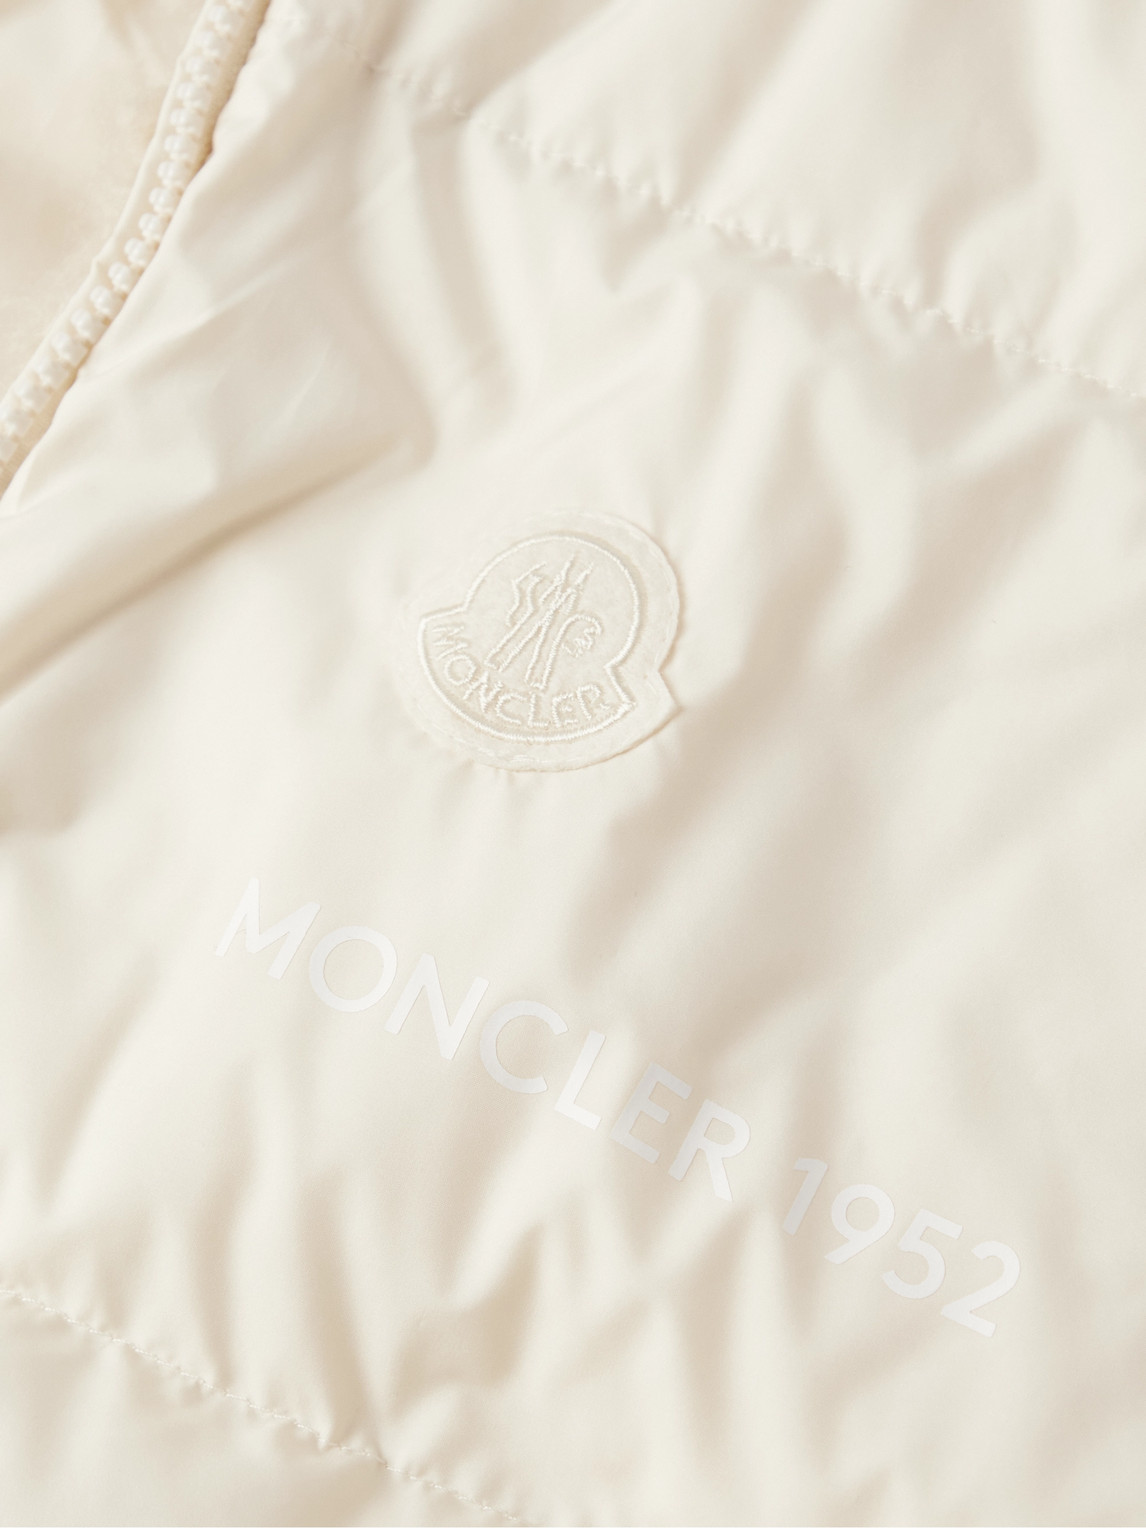 Shop Moncler Genius 2 Moncler 1952 Monnow Reversible Shell And Faux Shearling Down Jacket In Neutrals